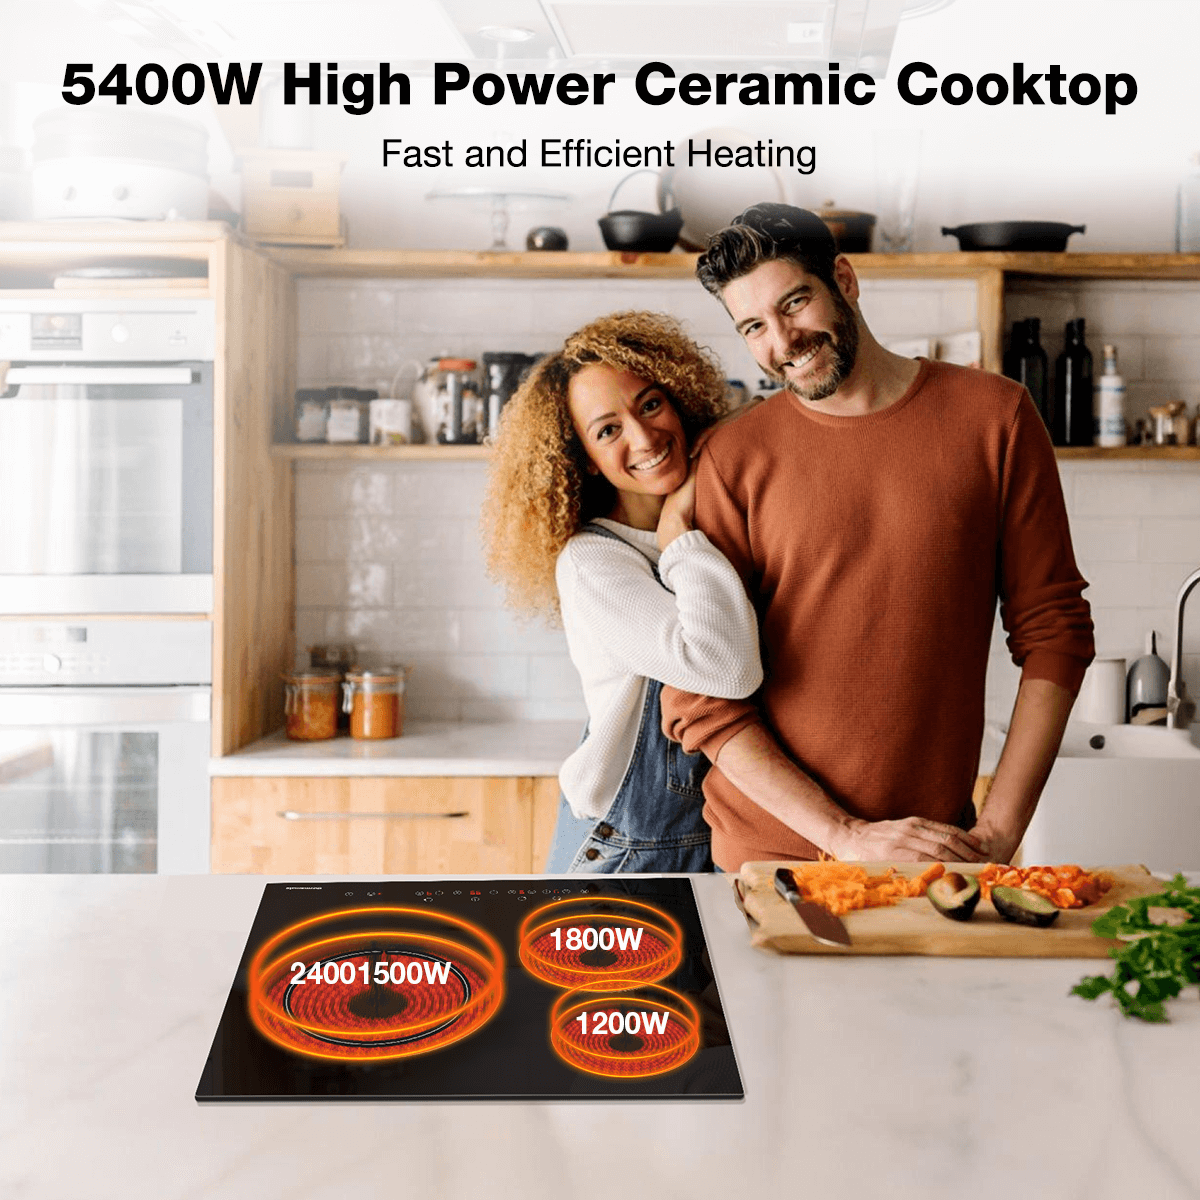 5400W High Power Ceramic Cooktop | Thermomate